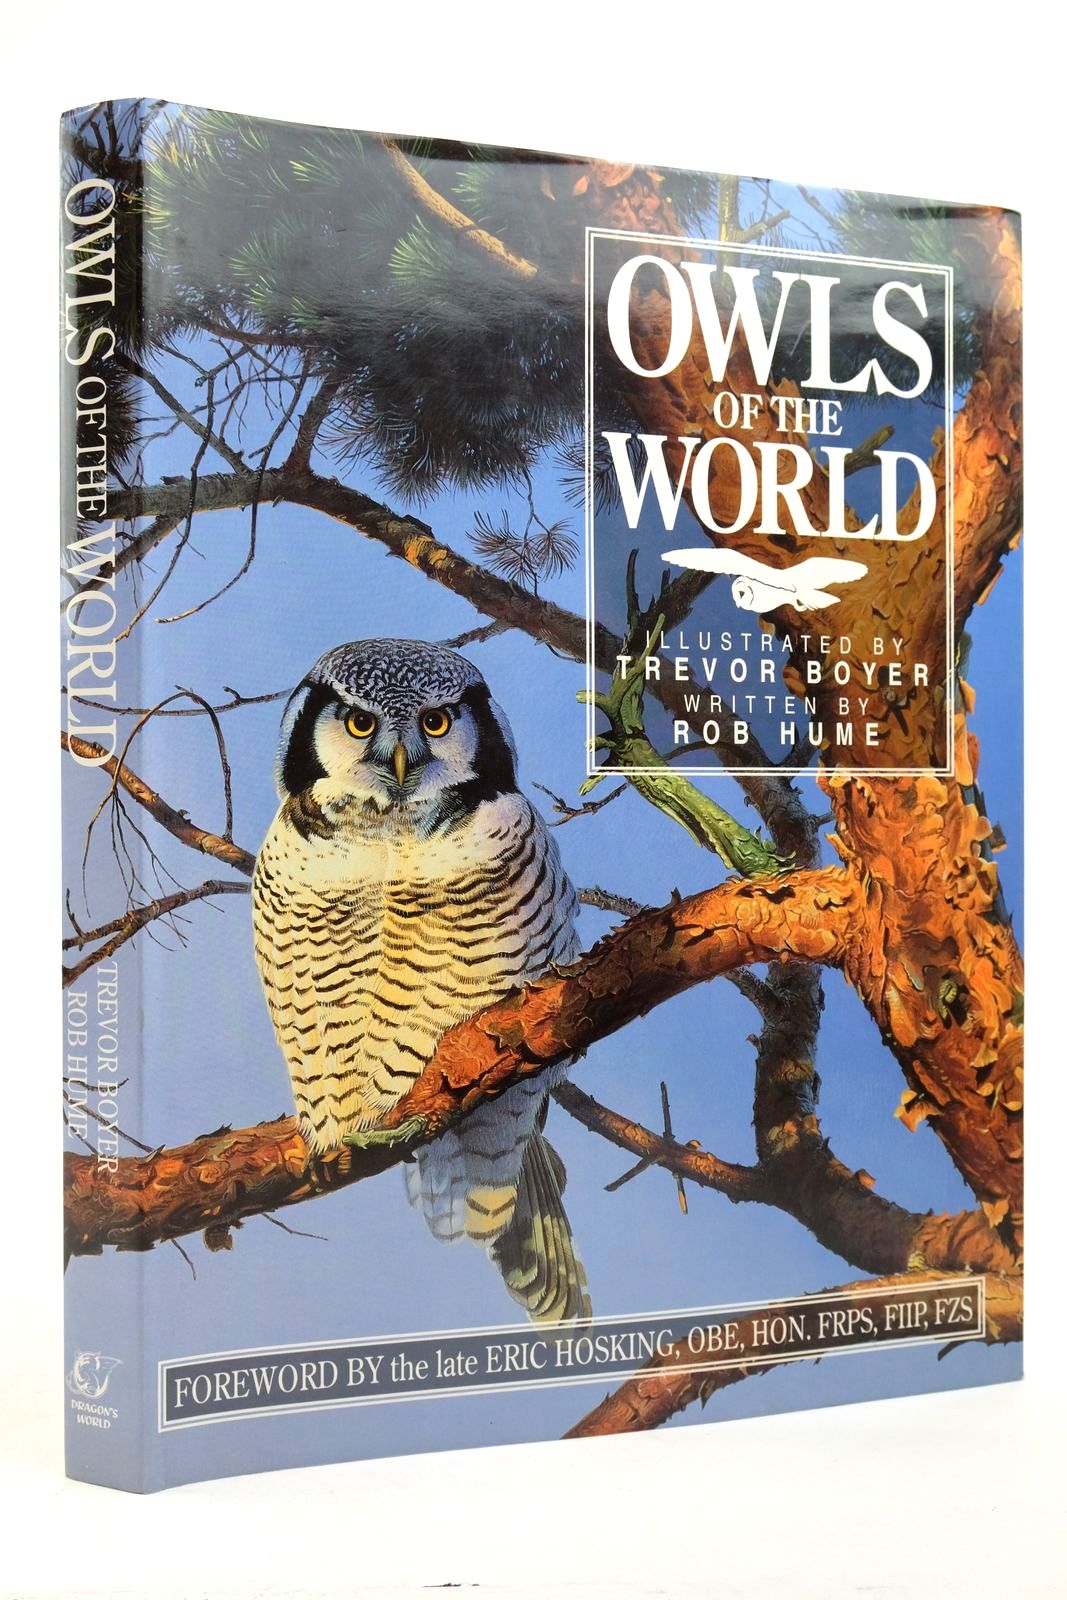 Photo of OWLS OF THE WORLD written by Hume, Rob illustrated by Boyer, Trevor published by Dragon's World (STOCK CODE: 2139084)  for sale by Stella & Rose's Books